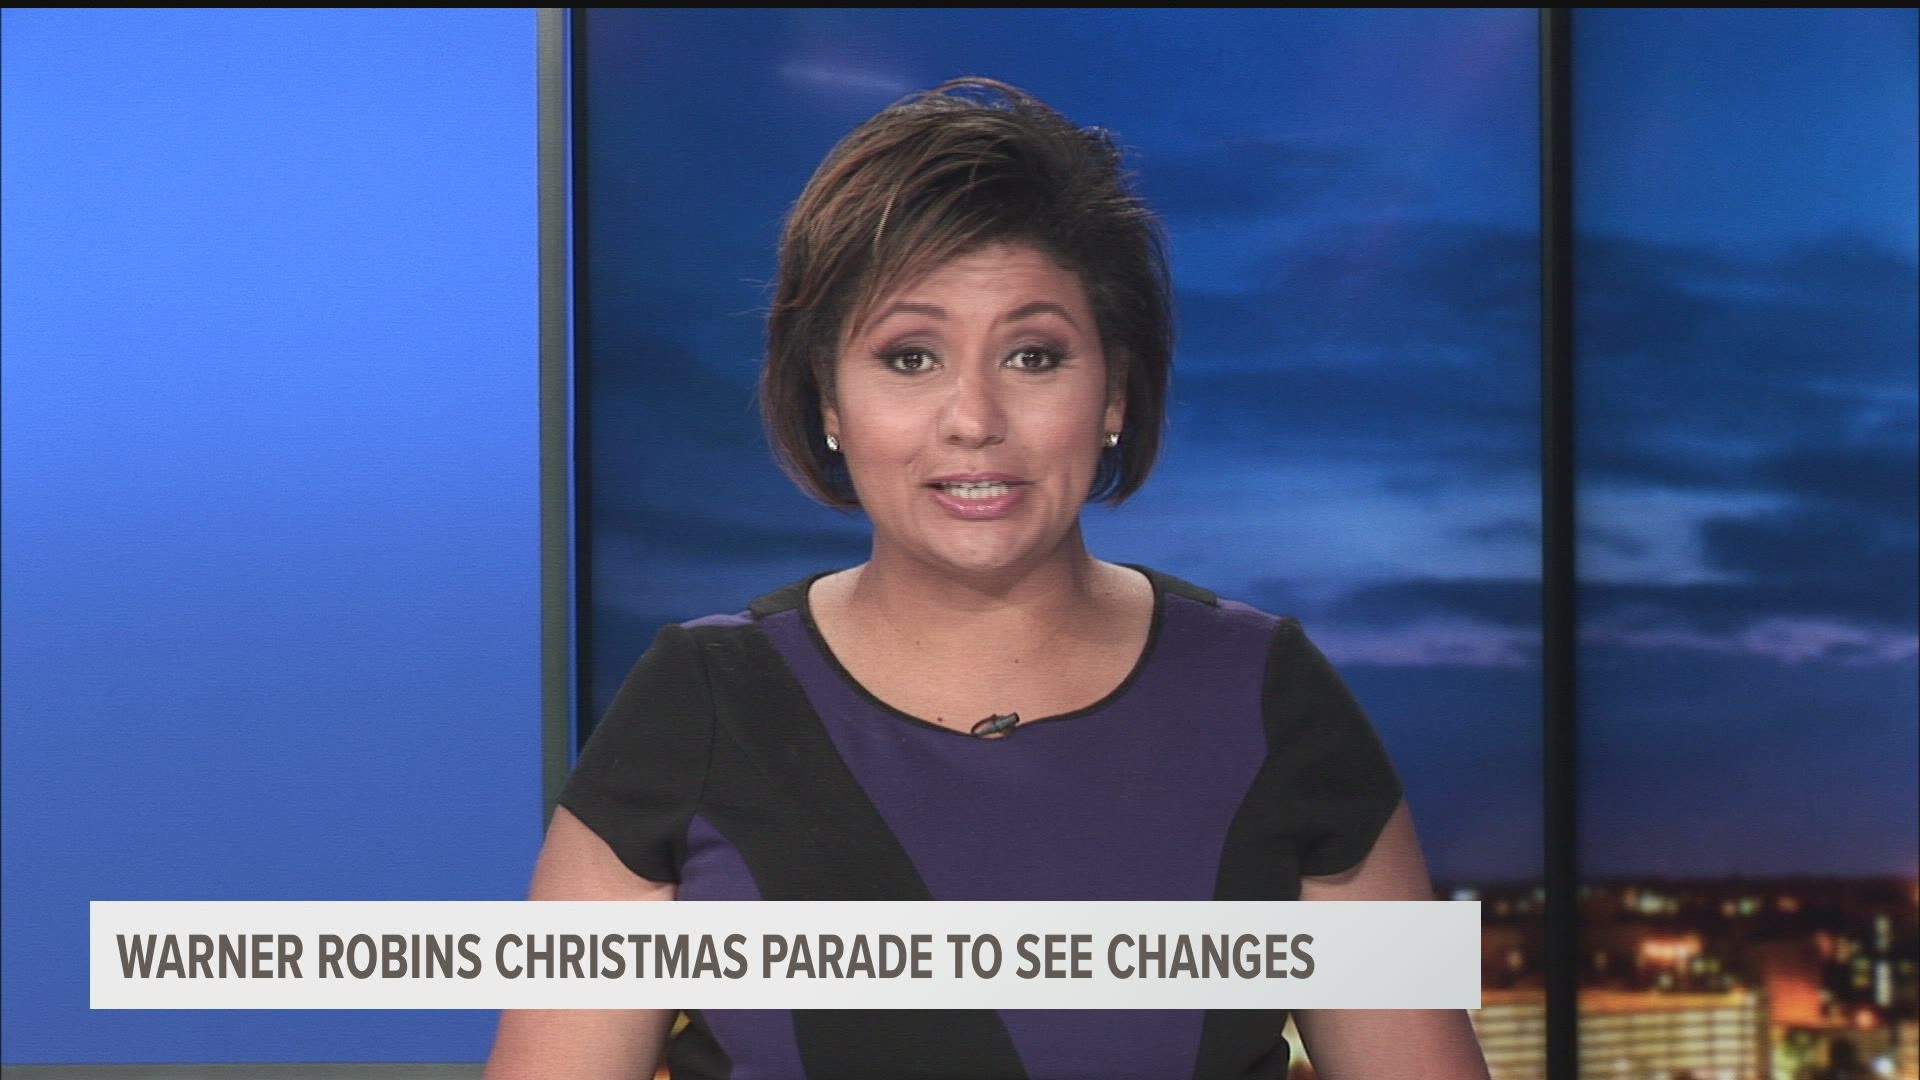 Robins Regional Chamber says Rigby's will run the annual Warner Robins Christmas Parade and make new changes.